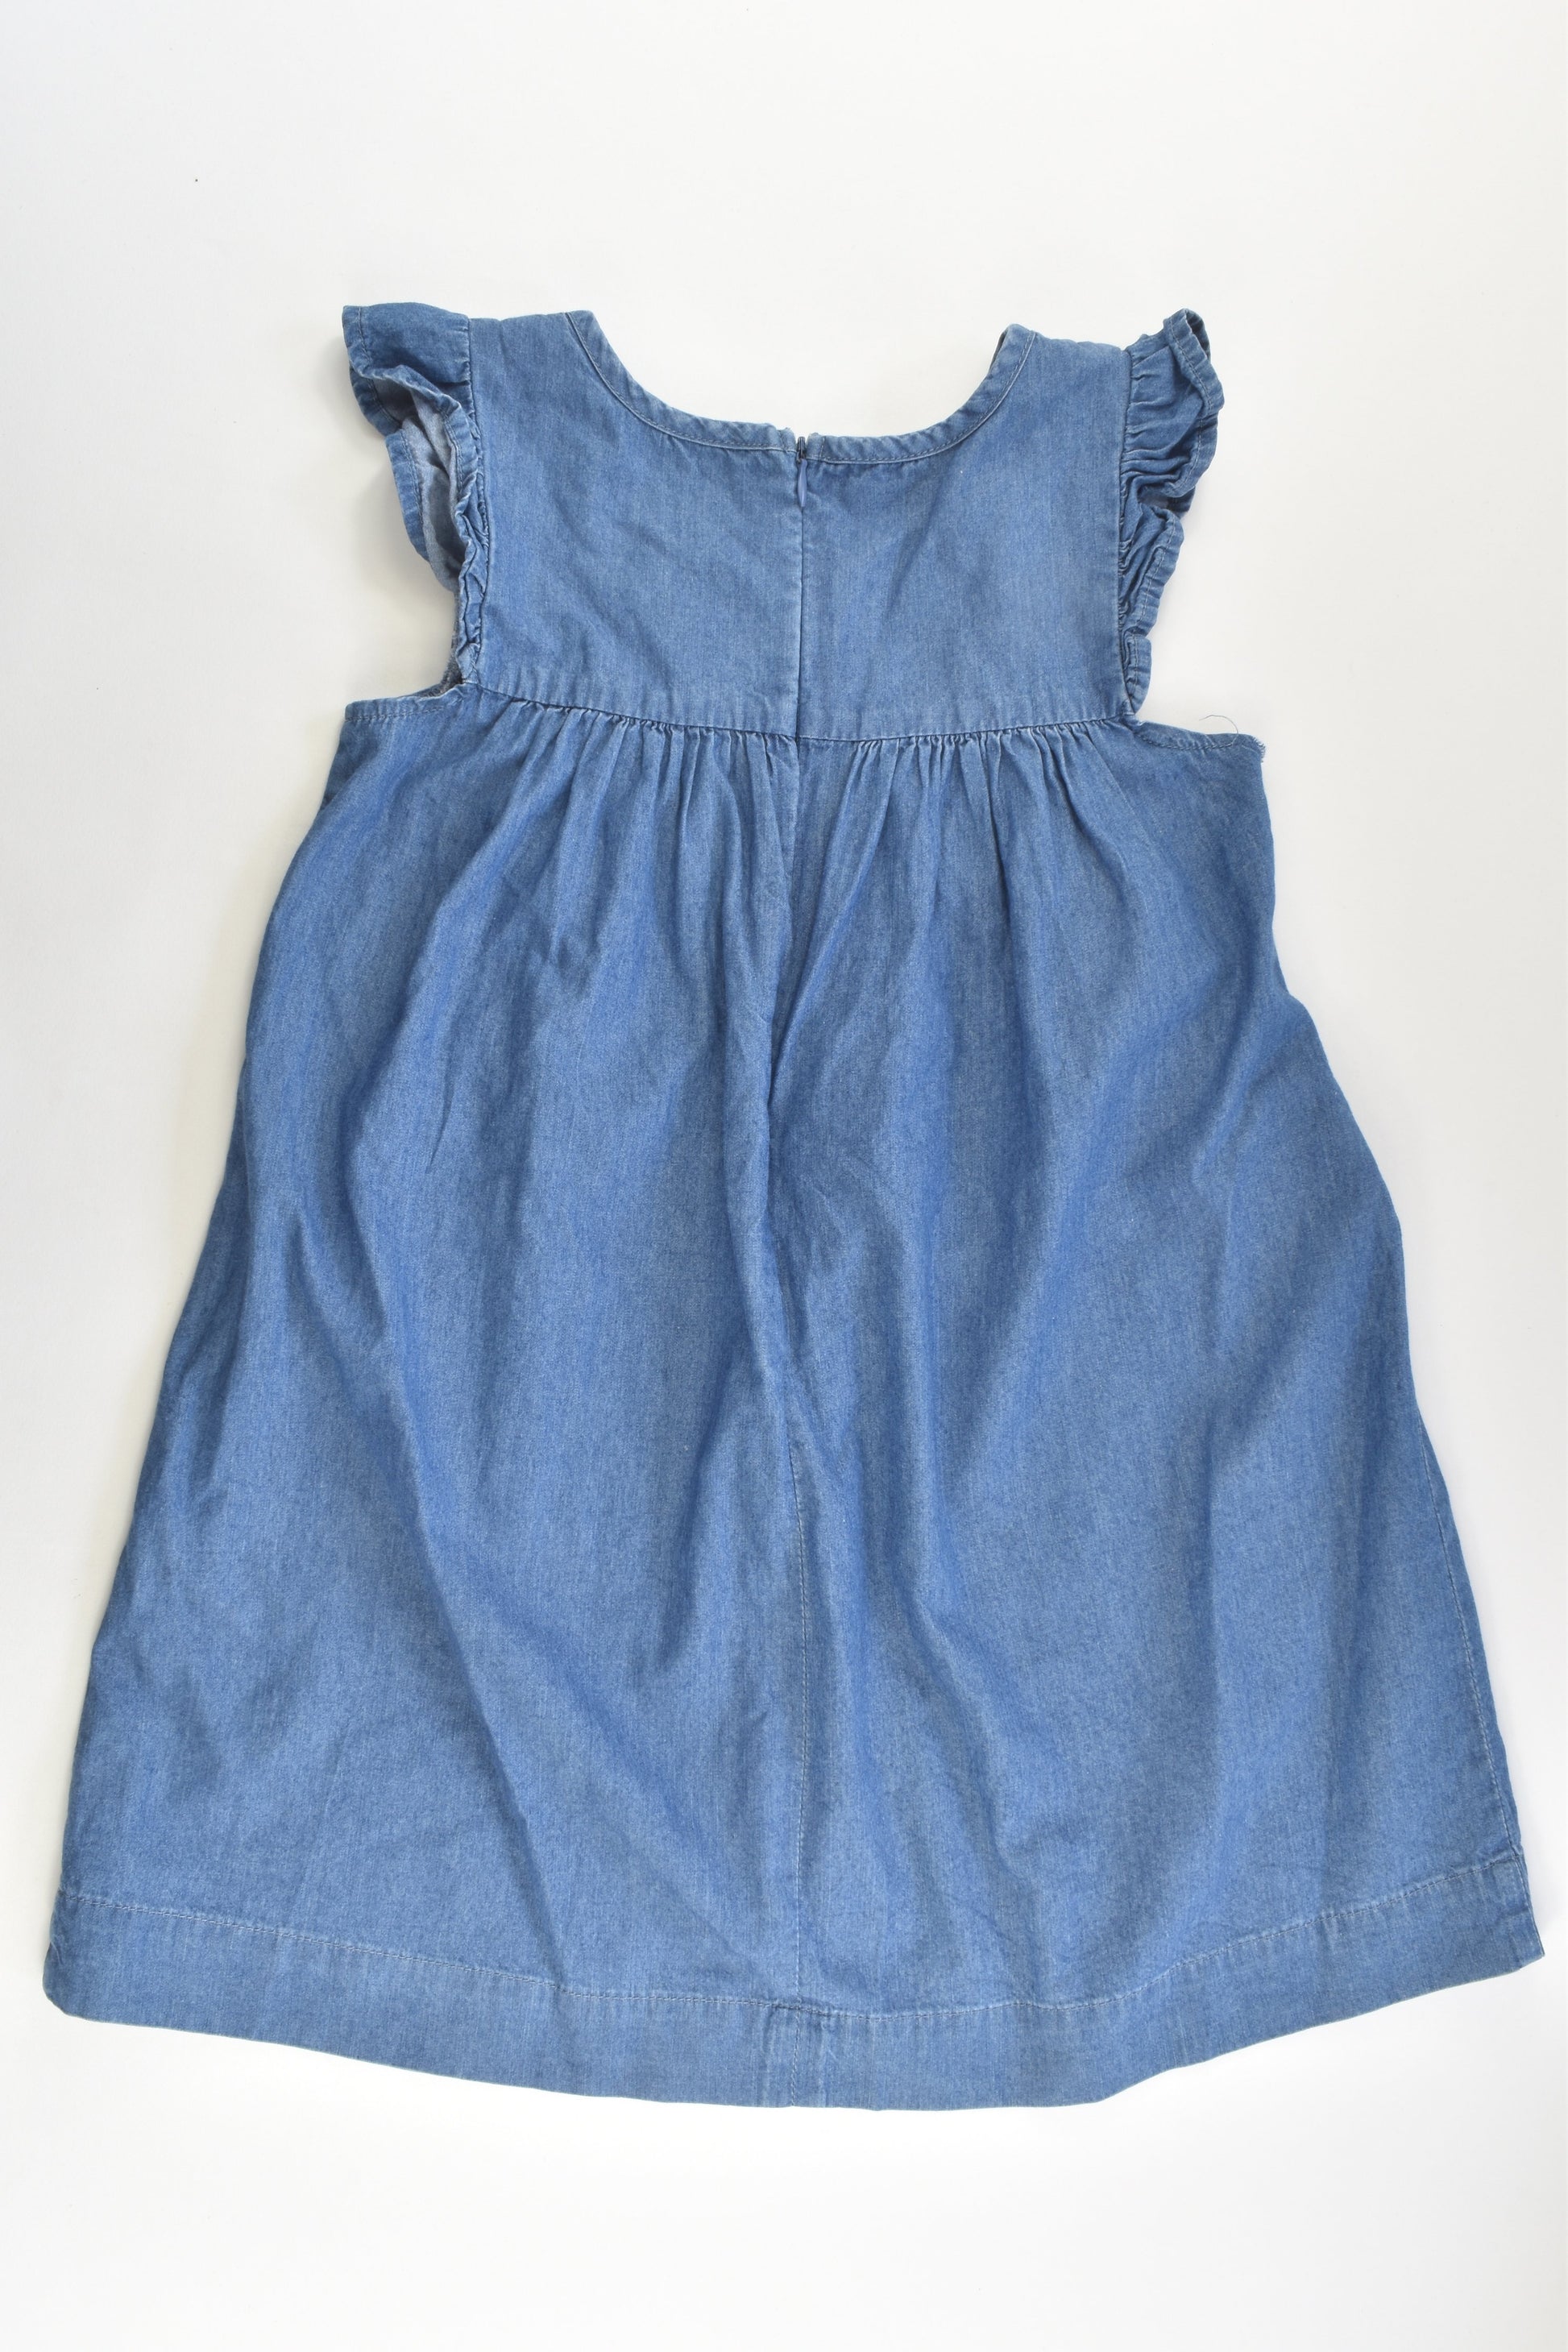 H&T Size 7 Lightweight Denim Dress with Embroidery